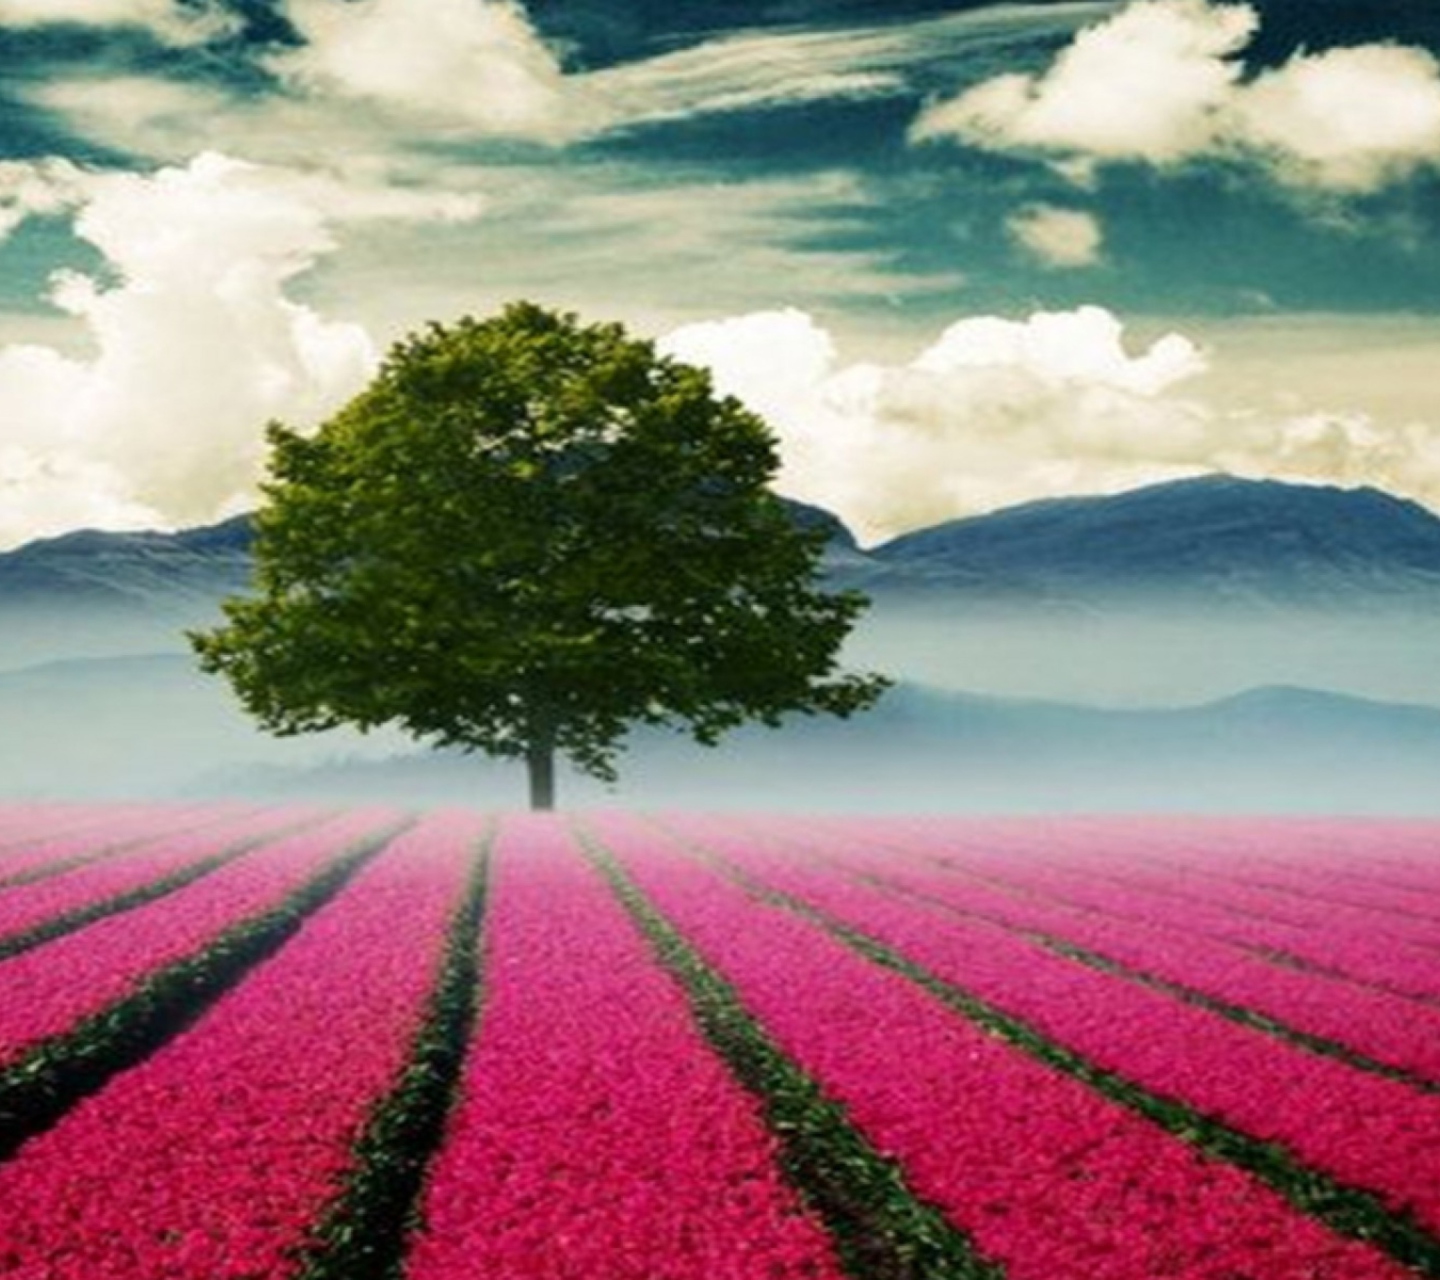 Beautiful Landscape With Tree And Pink Flower Field screenshot #1 1440x1280